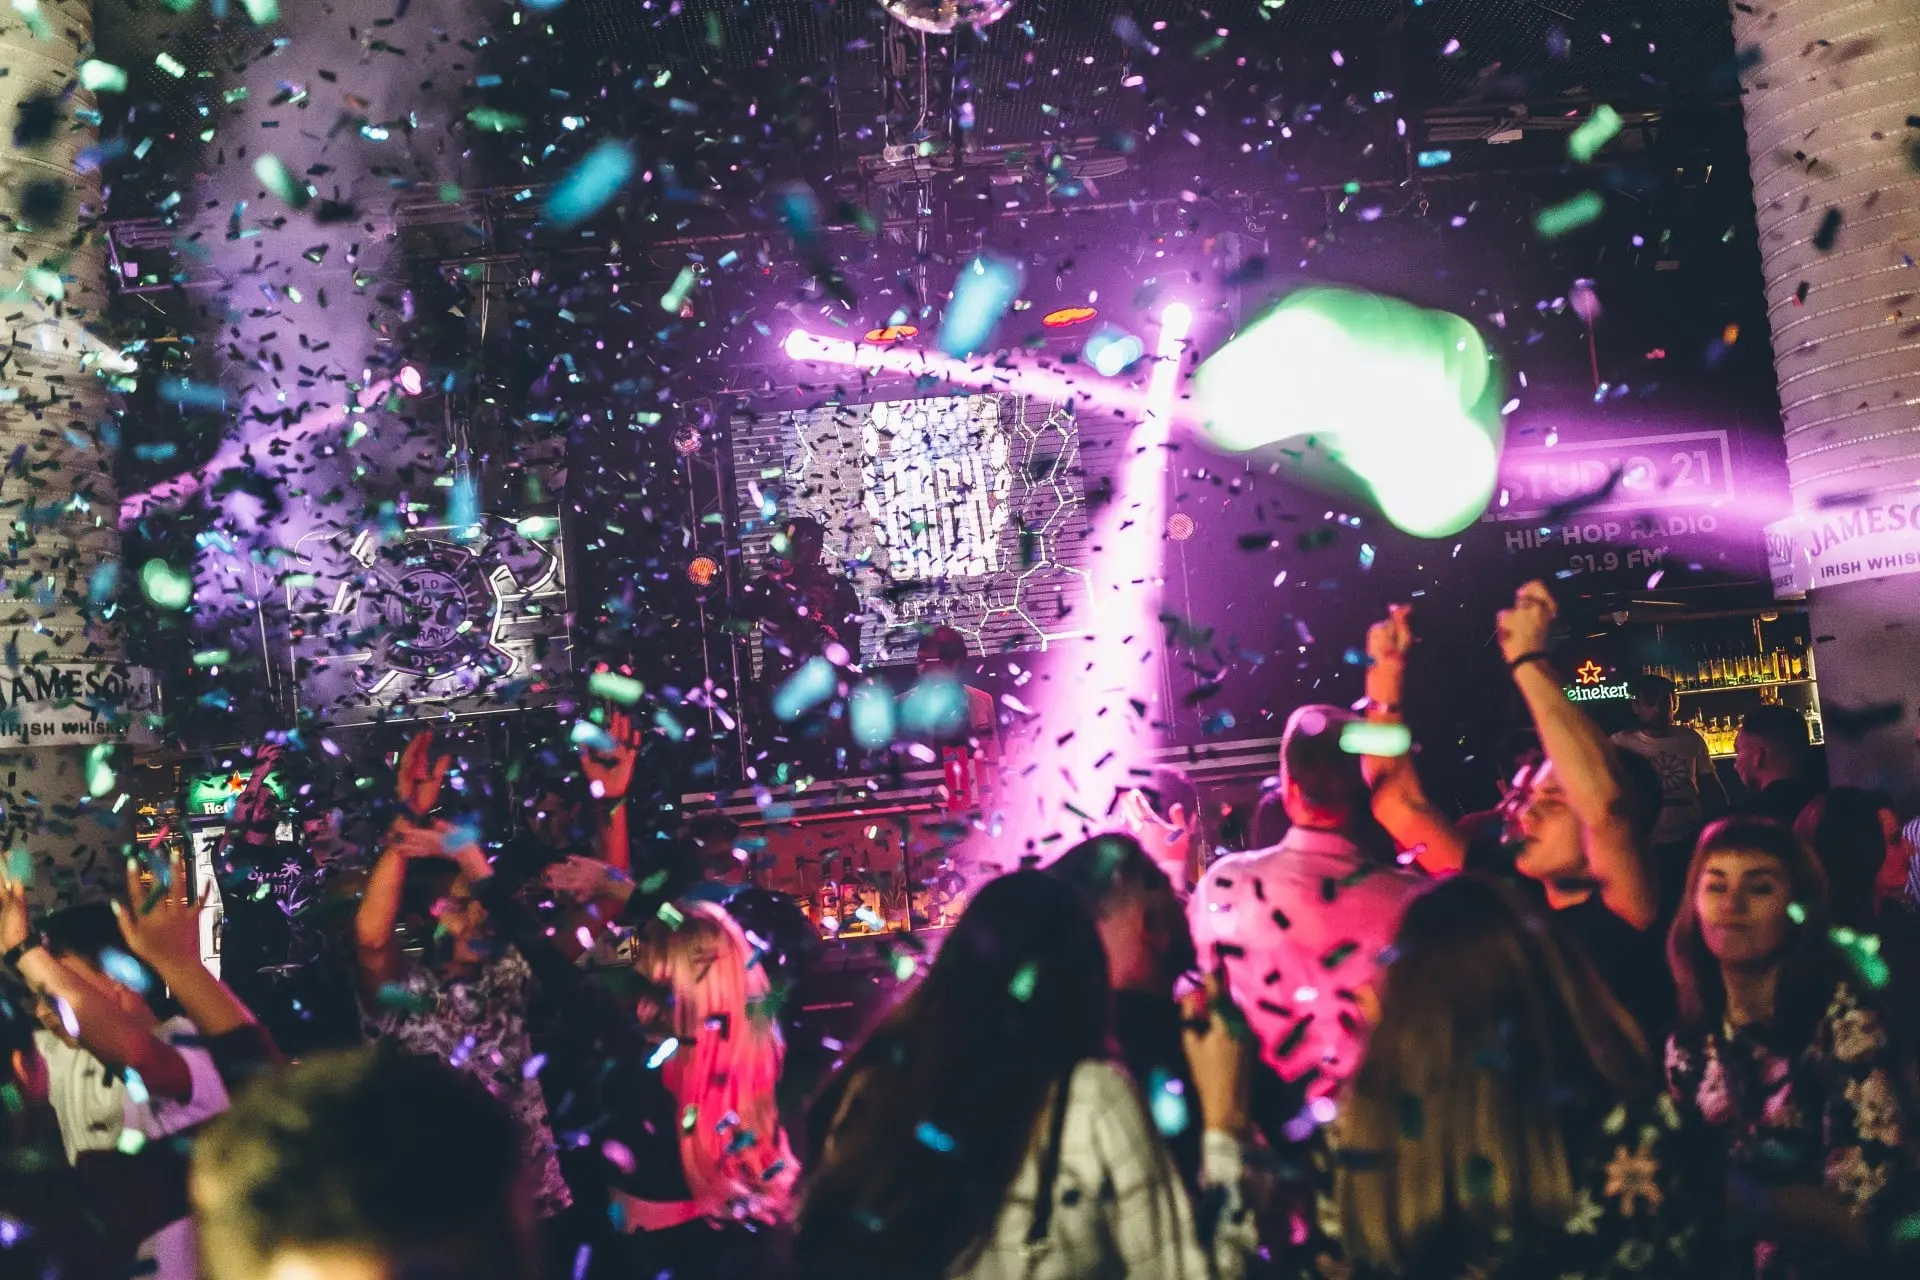 Party scene with lots of confetti, DJ on stage